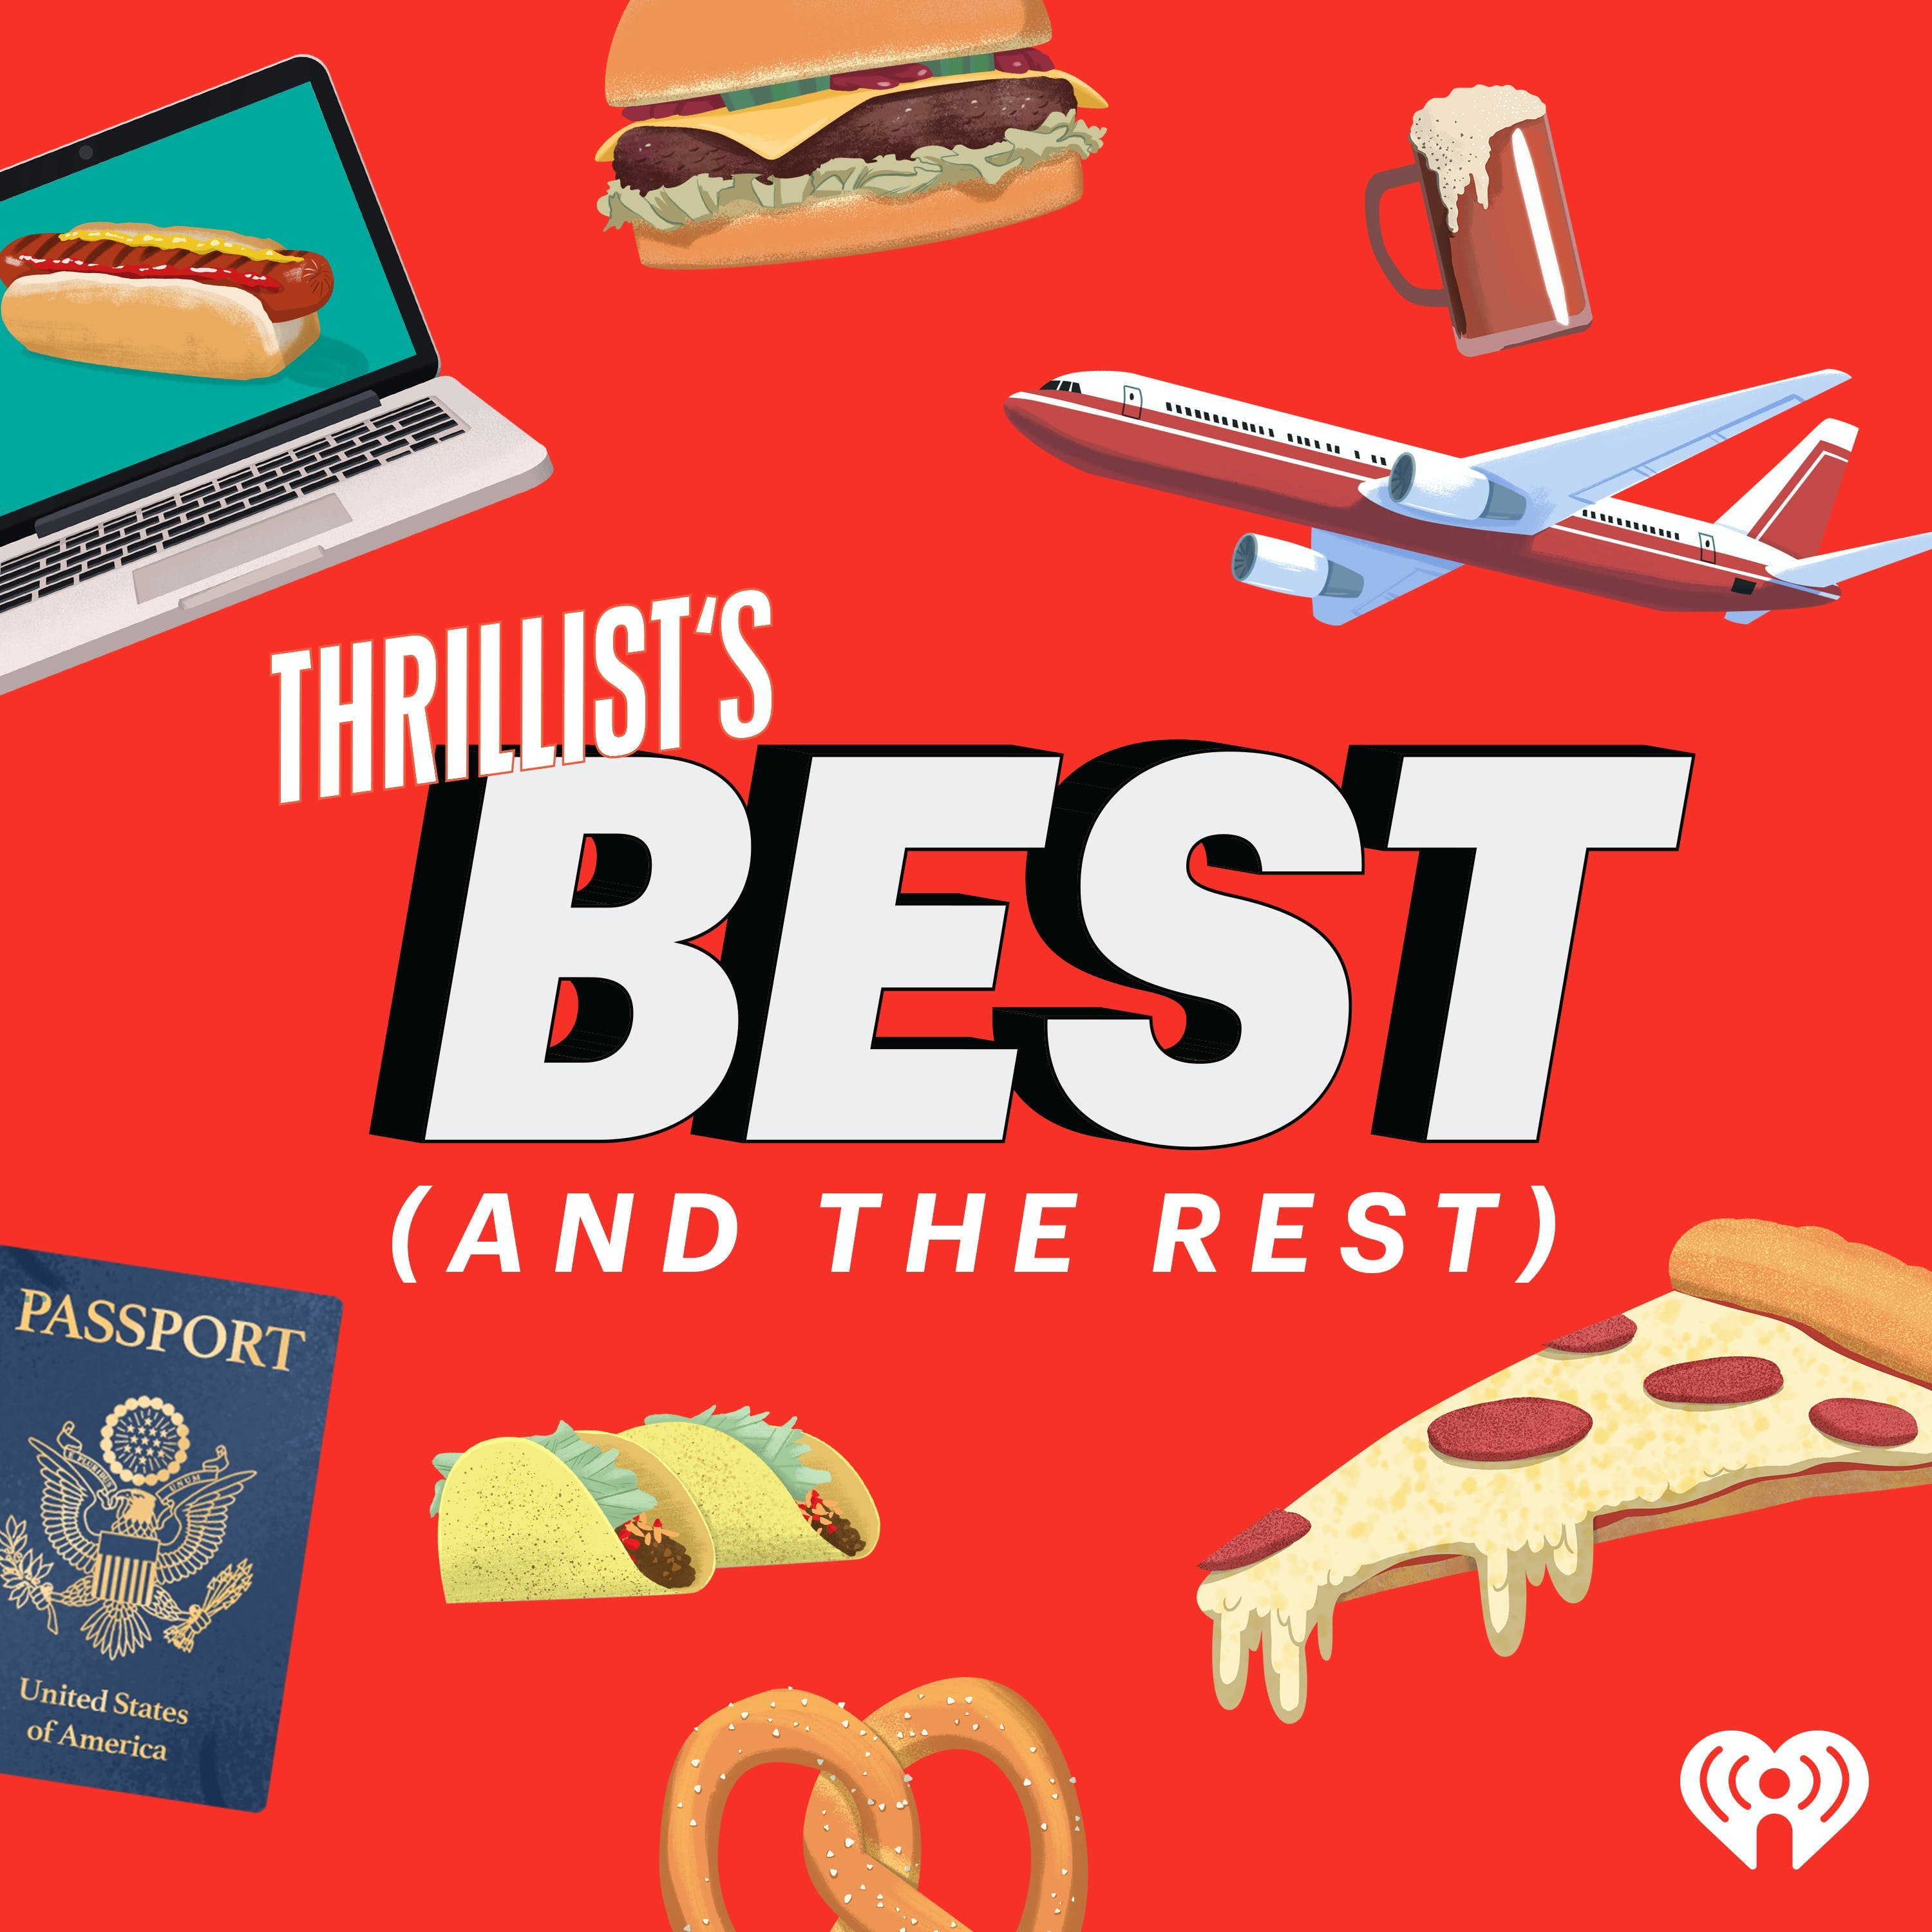 THRILLIST'S BEST: Truckers' Advice for Road Trips, Their Wildest Stories & the Most Scenic Drives